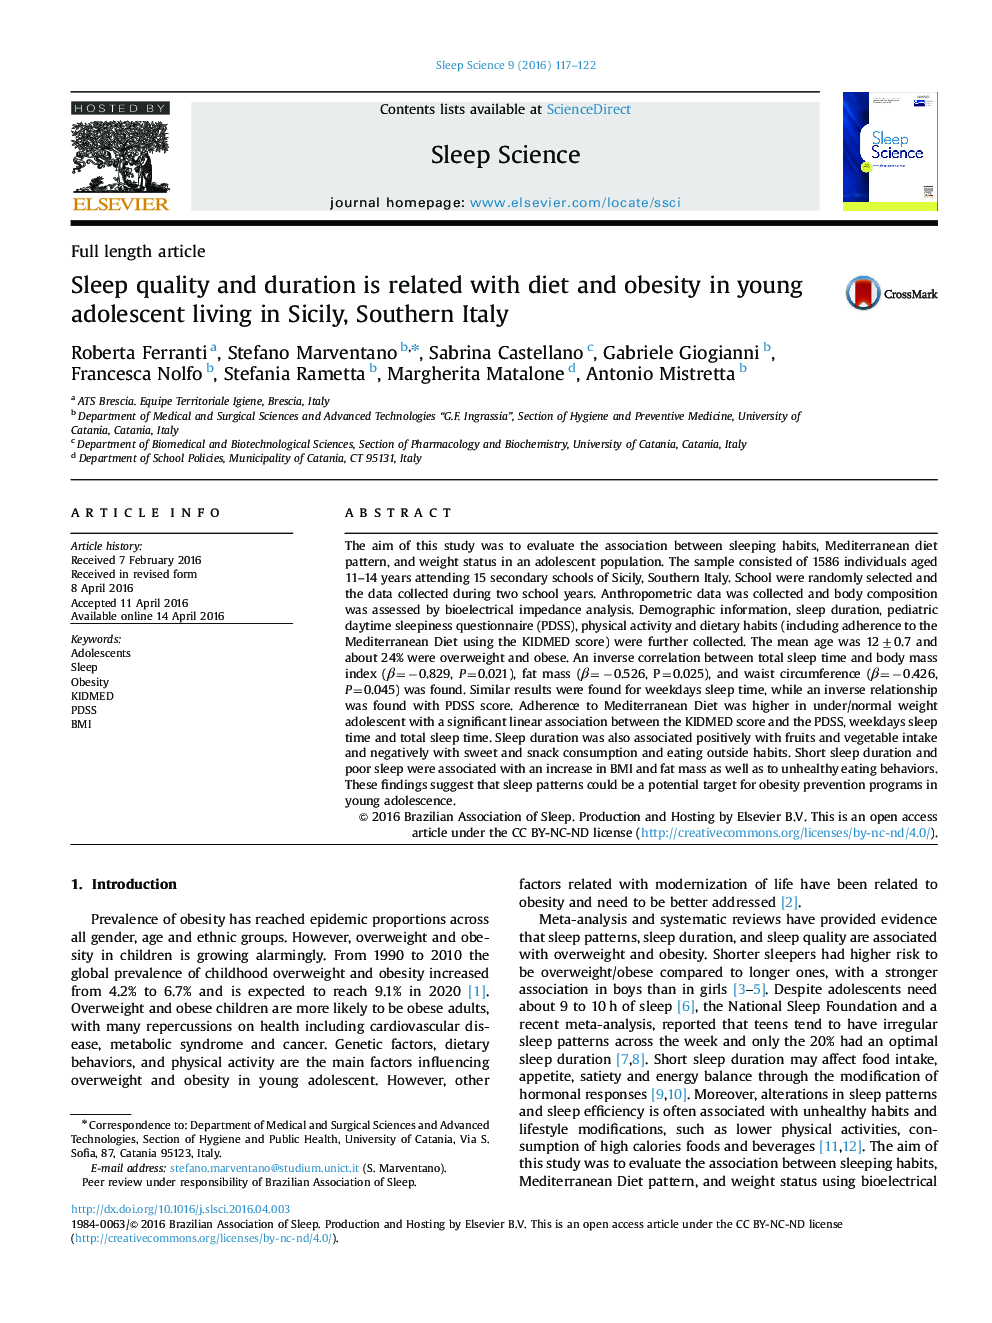 Sleep quality and duration is related with diet and obesity in young adolescent living in Sicily, Southern Italy 